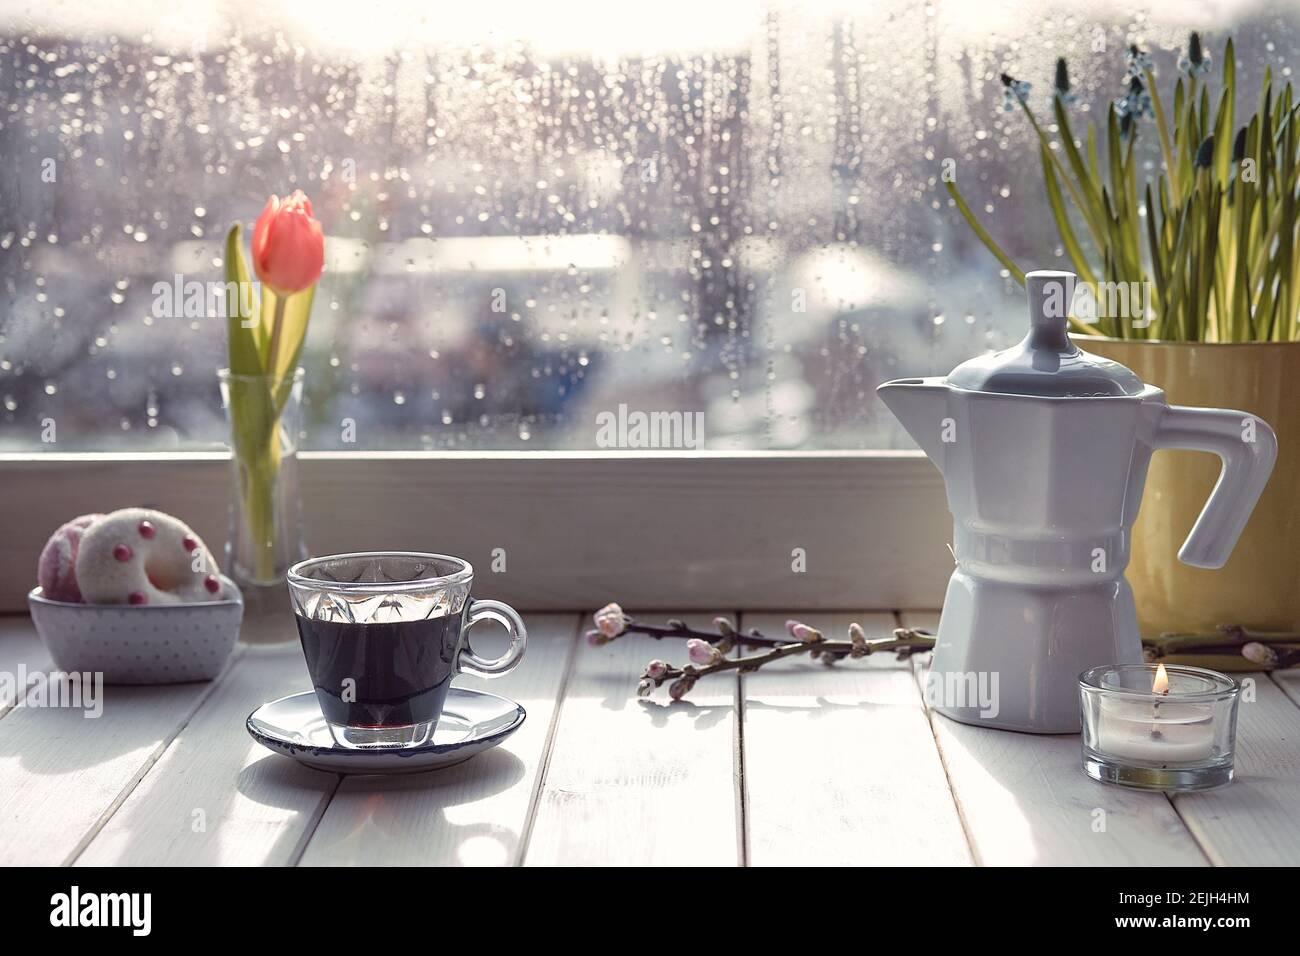 Oriental coffee in traditional Turkish copper coffee pot with flowers on window sill. Wooden windowsill with orange tulips and hyacinth flower pot Stock Photo